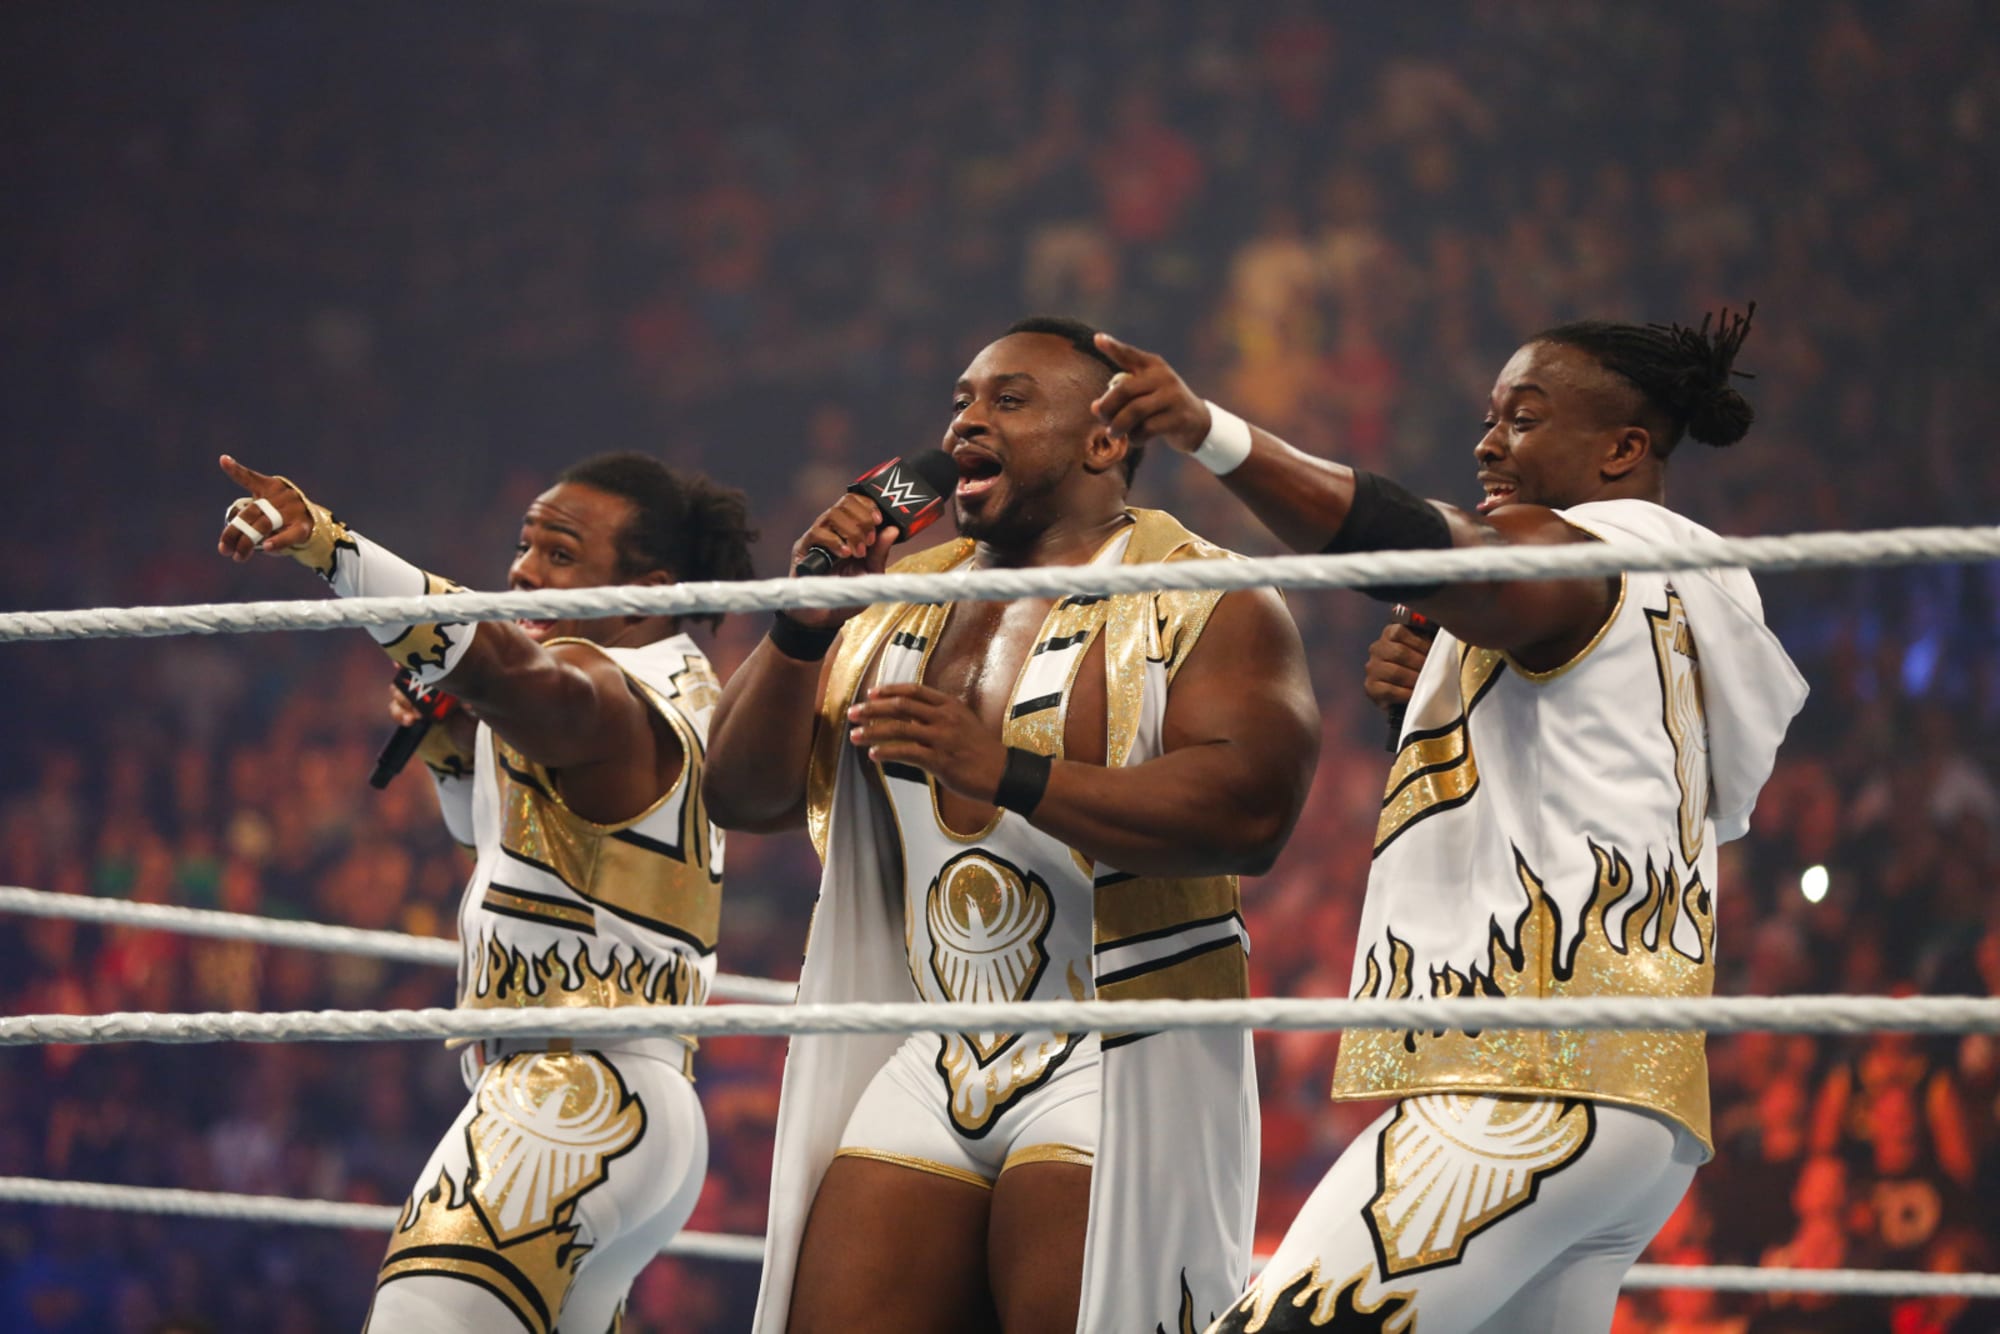 The New Day is officially WWE's top tag team of all time